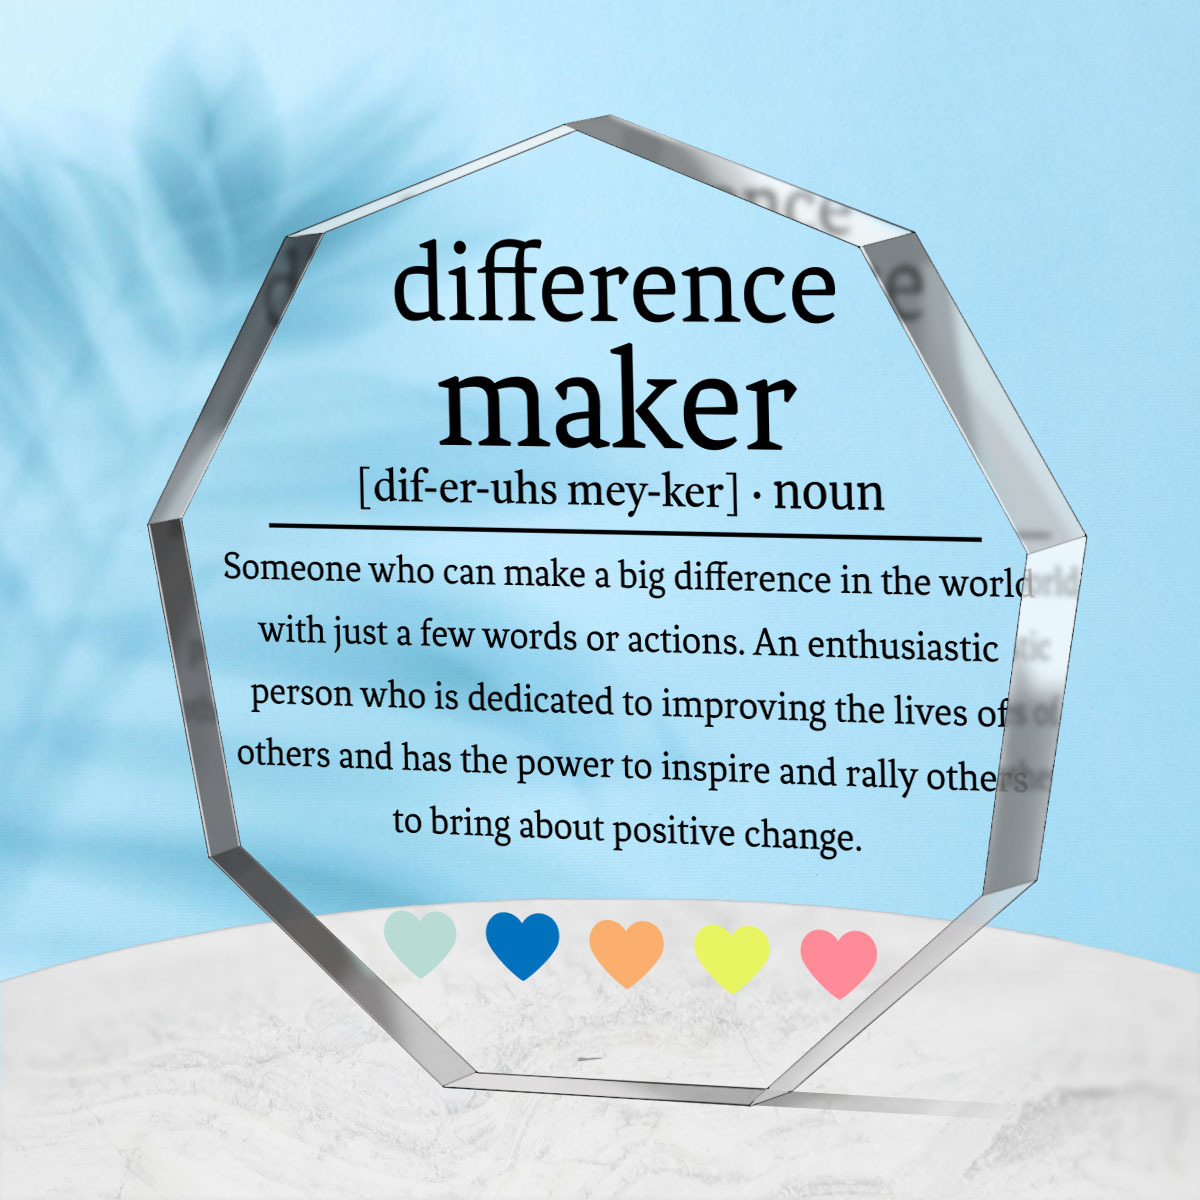 Difference Maker Definition Desk Decor, Thank You Gifts For Women Men,  Appreciation Gifts, New Job Gifts, Inspirational Home Office Decor, Wood  Plaque